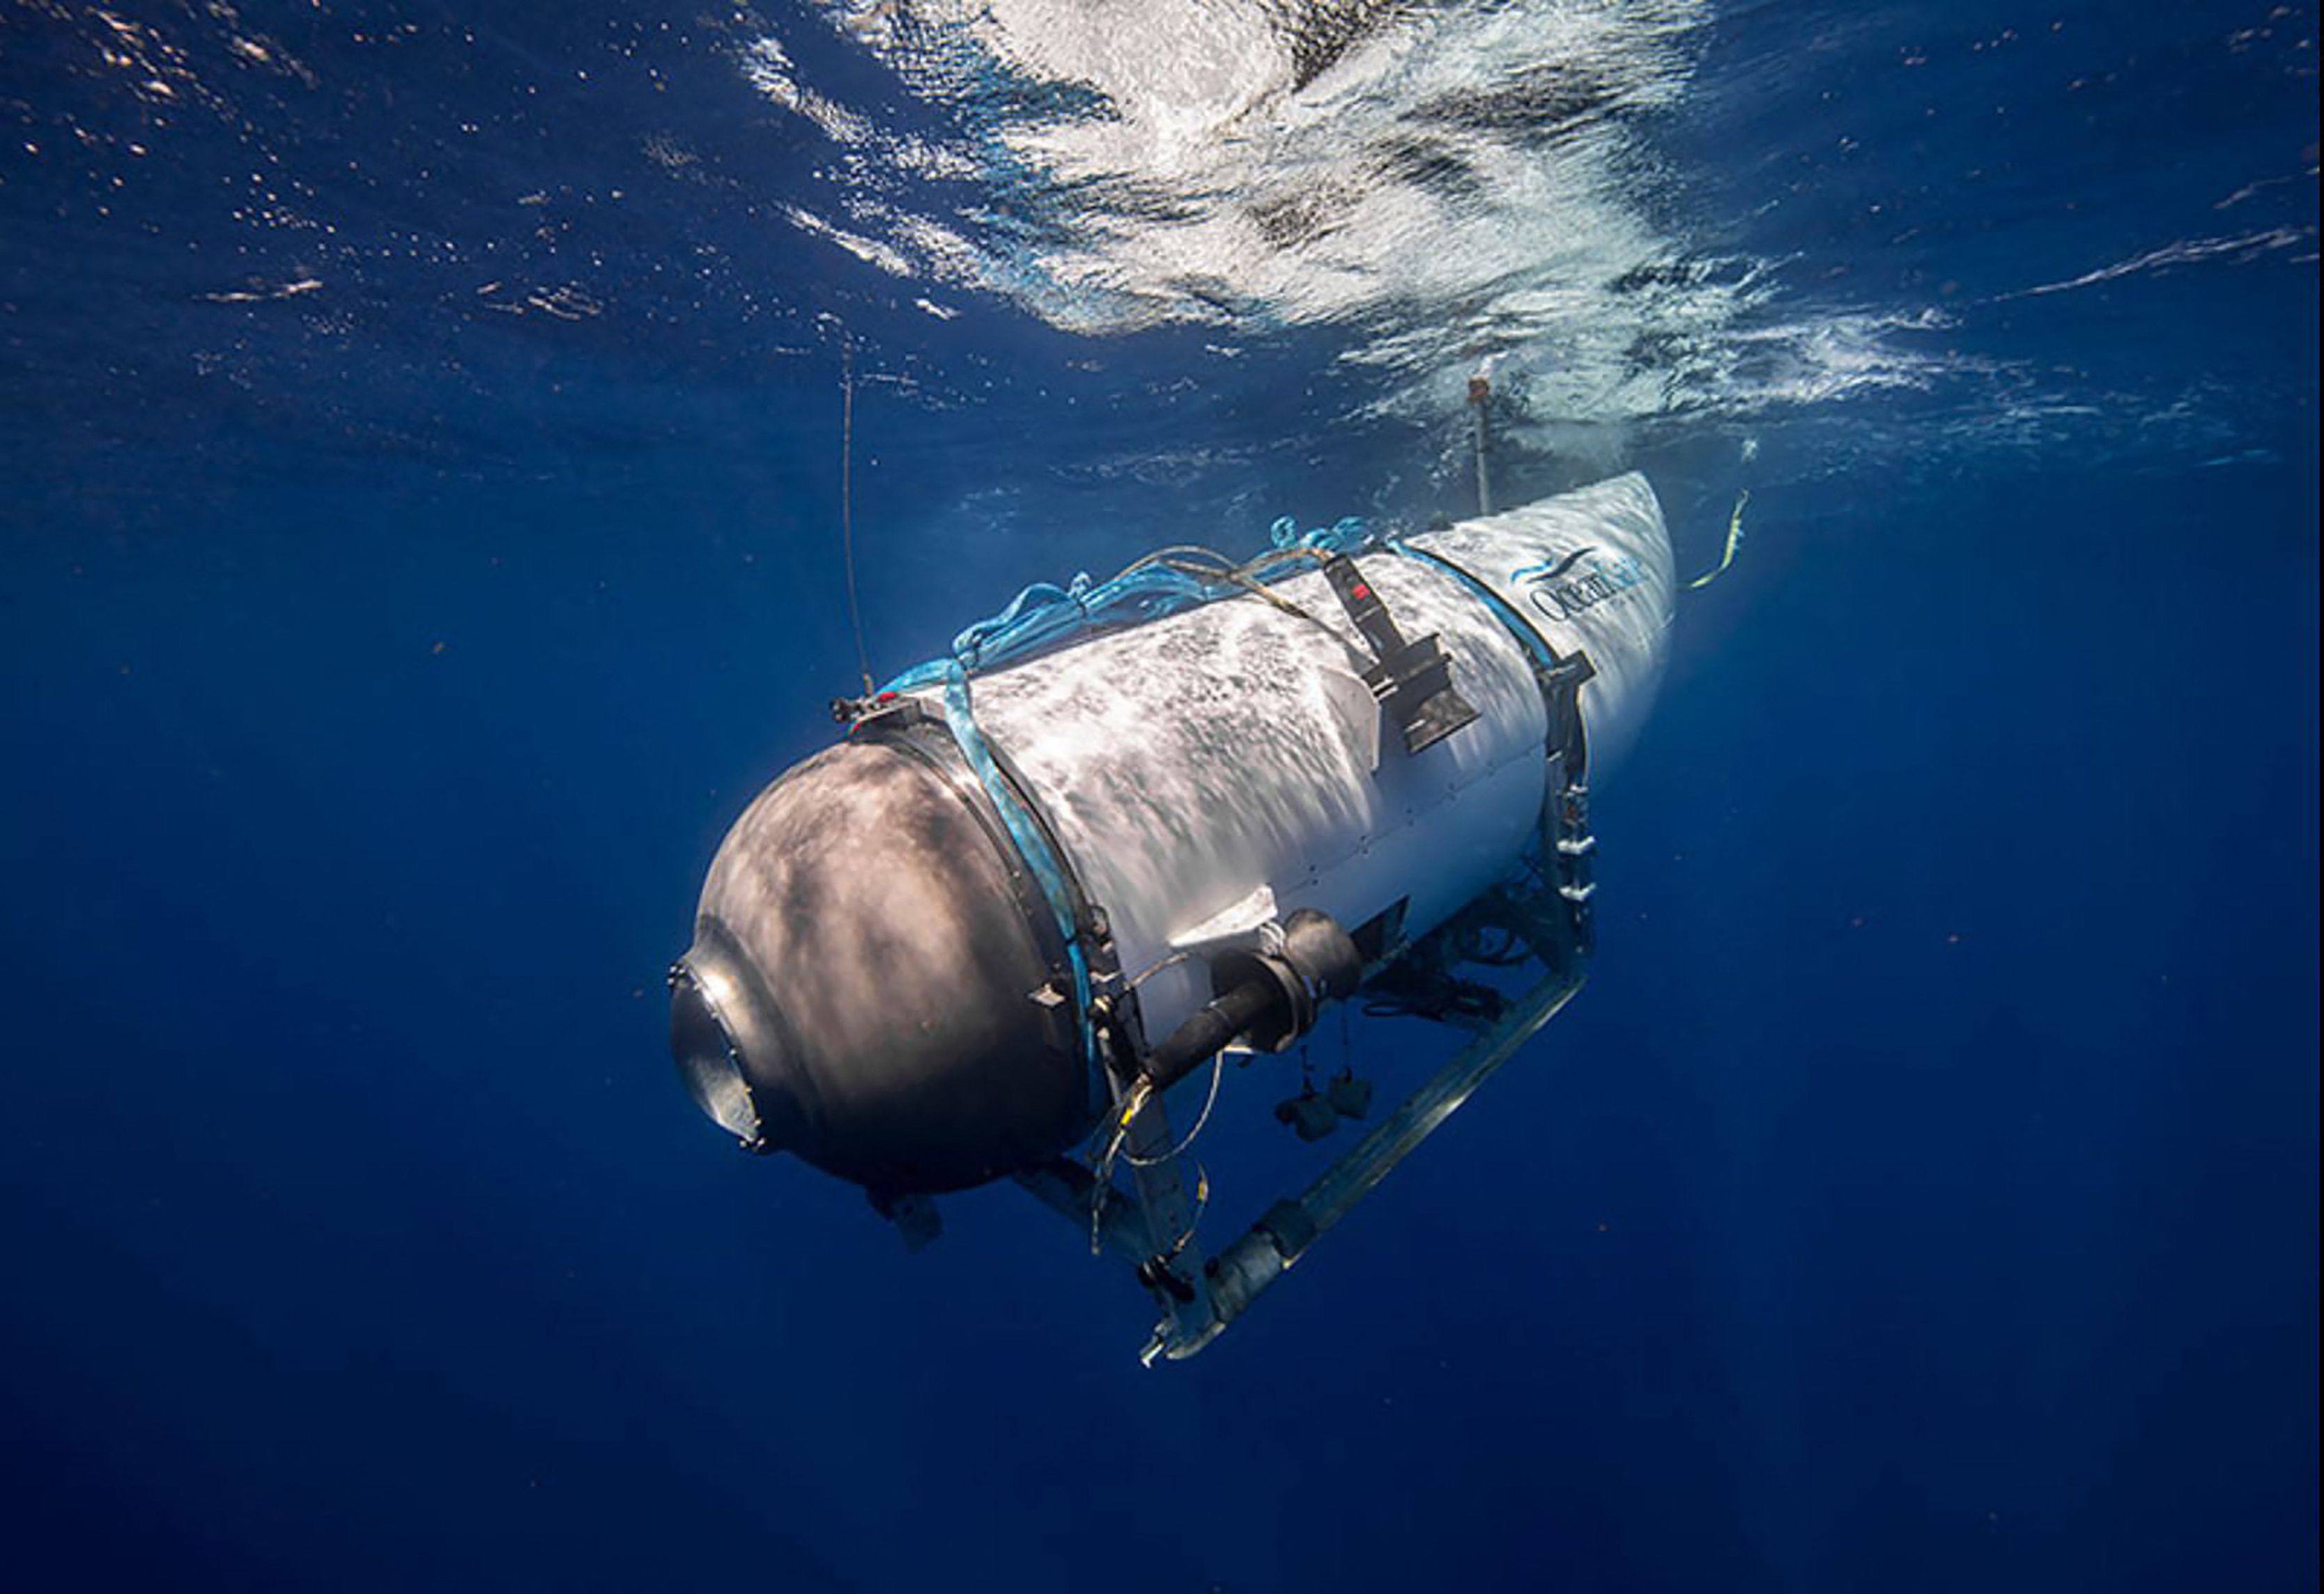 An undated image shows the OceanGate Expeditions Titan submersible beginning a descent. Photo: OceanGate Expeditions via AFP